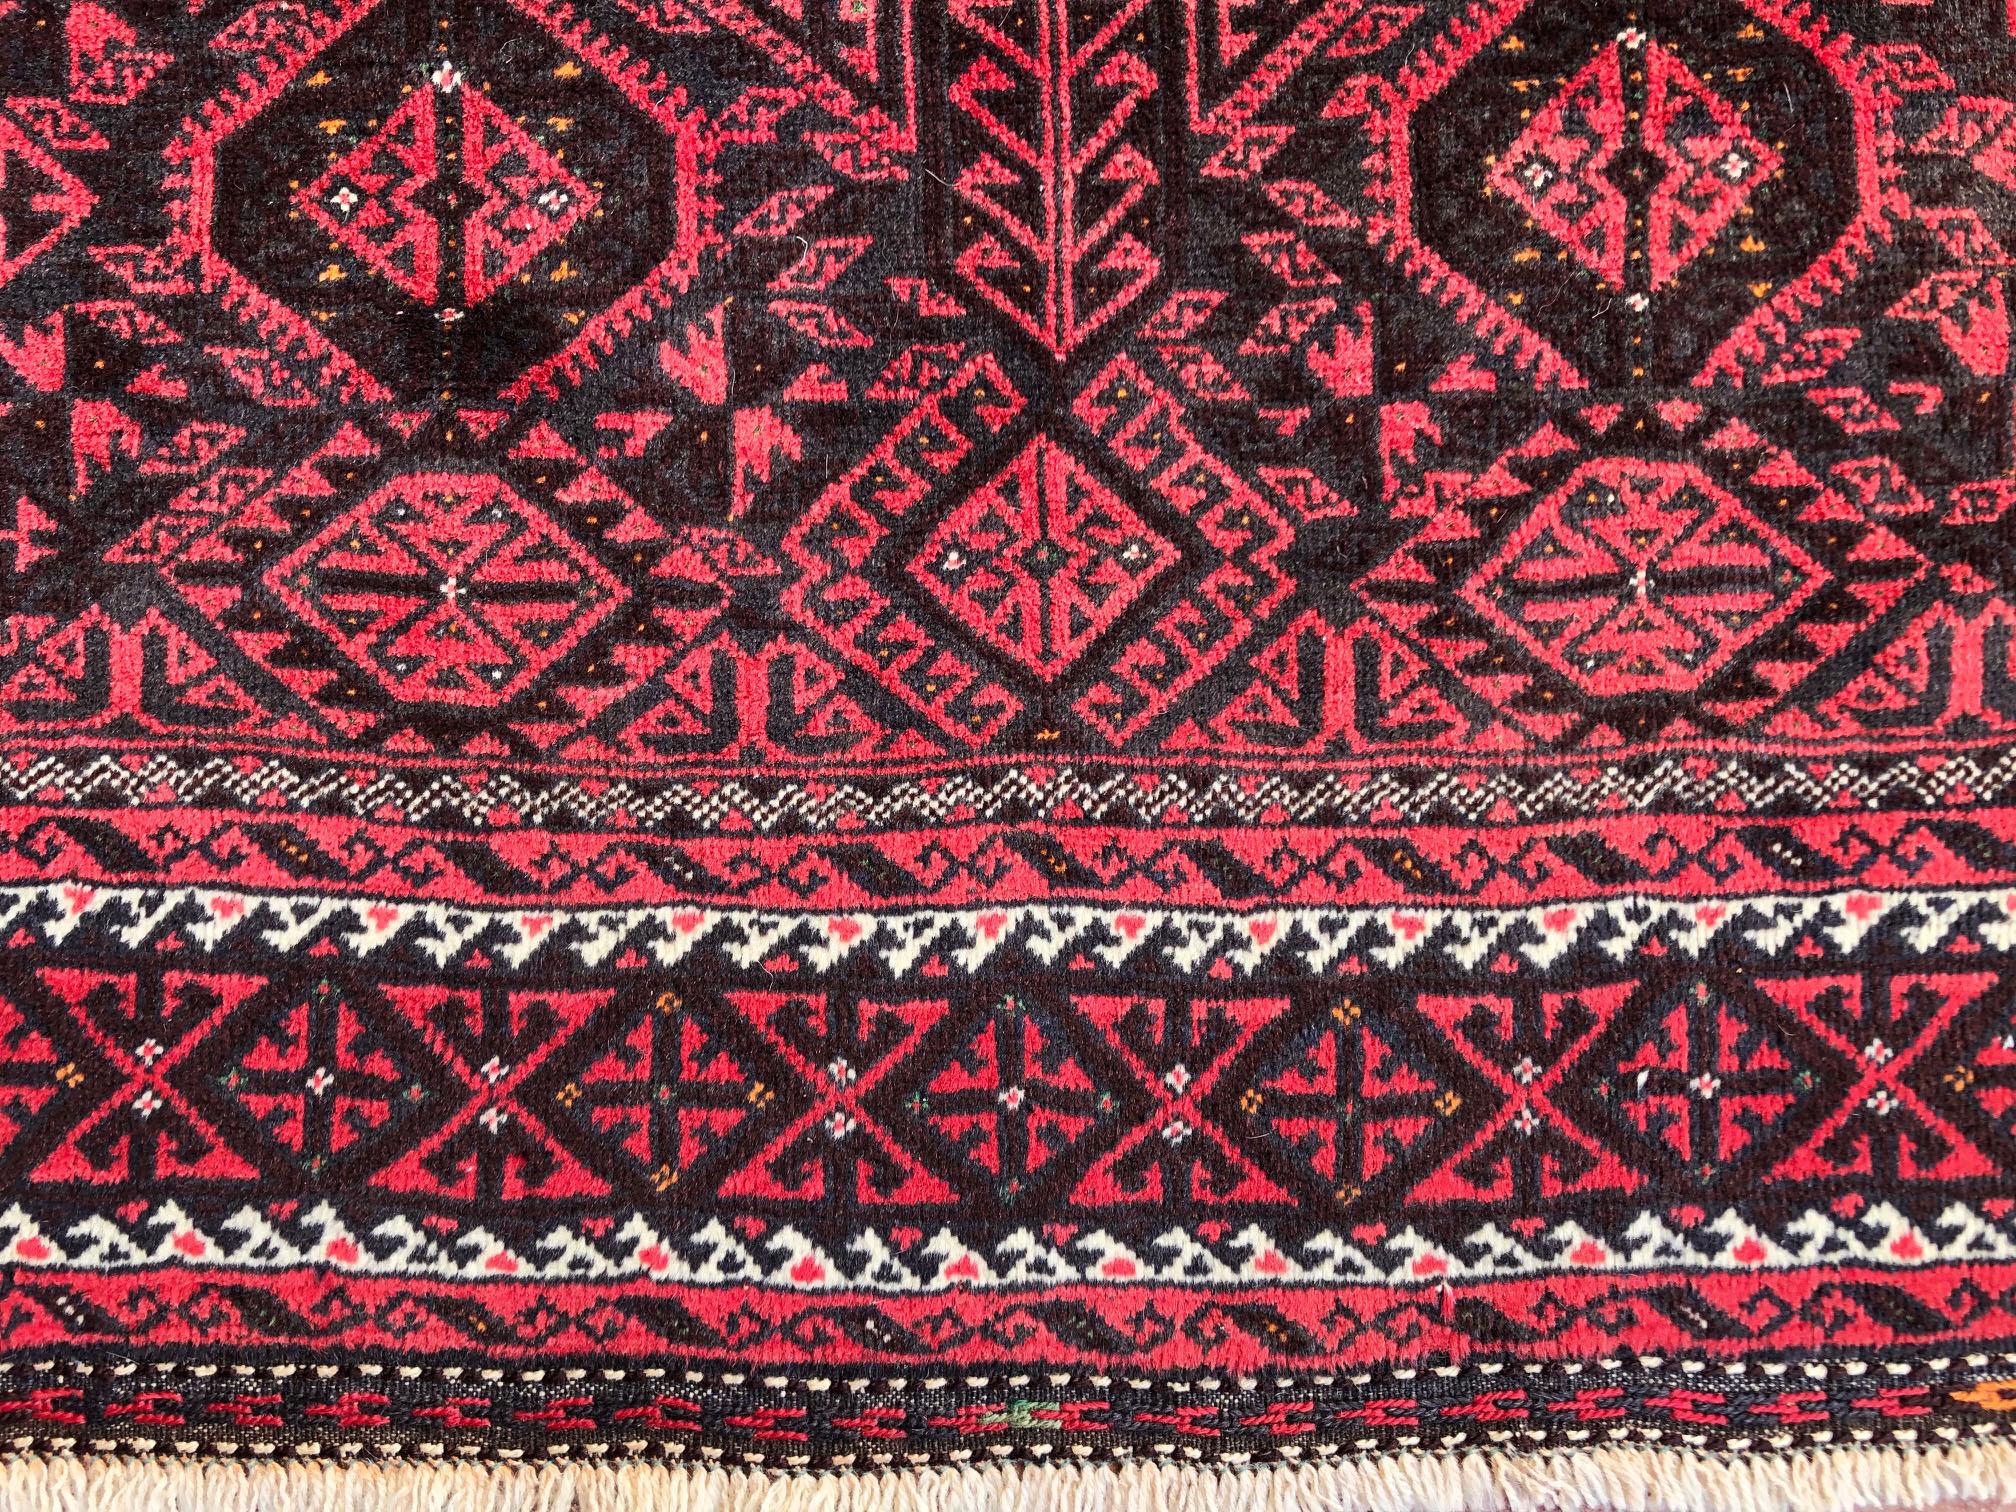 Wool Authentic Persian Hand Knotted Geometric All-Over Red Black Baluchi Rug, 1960 For Sale